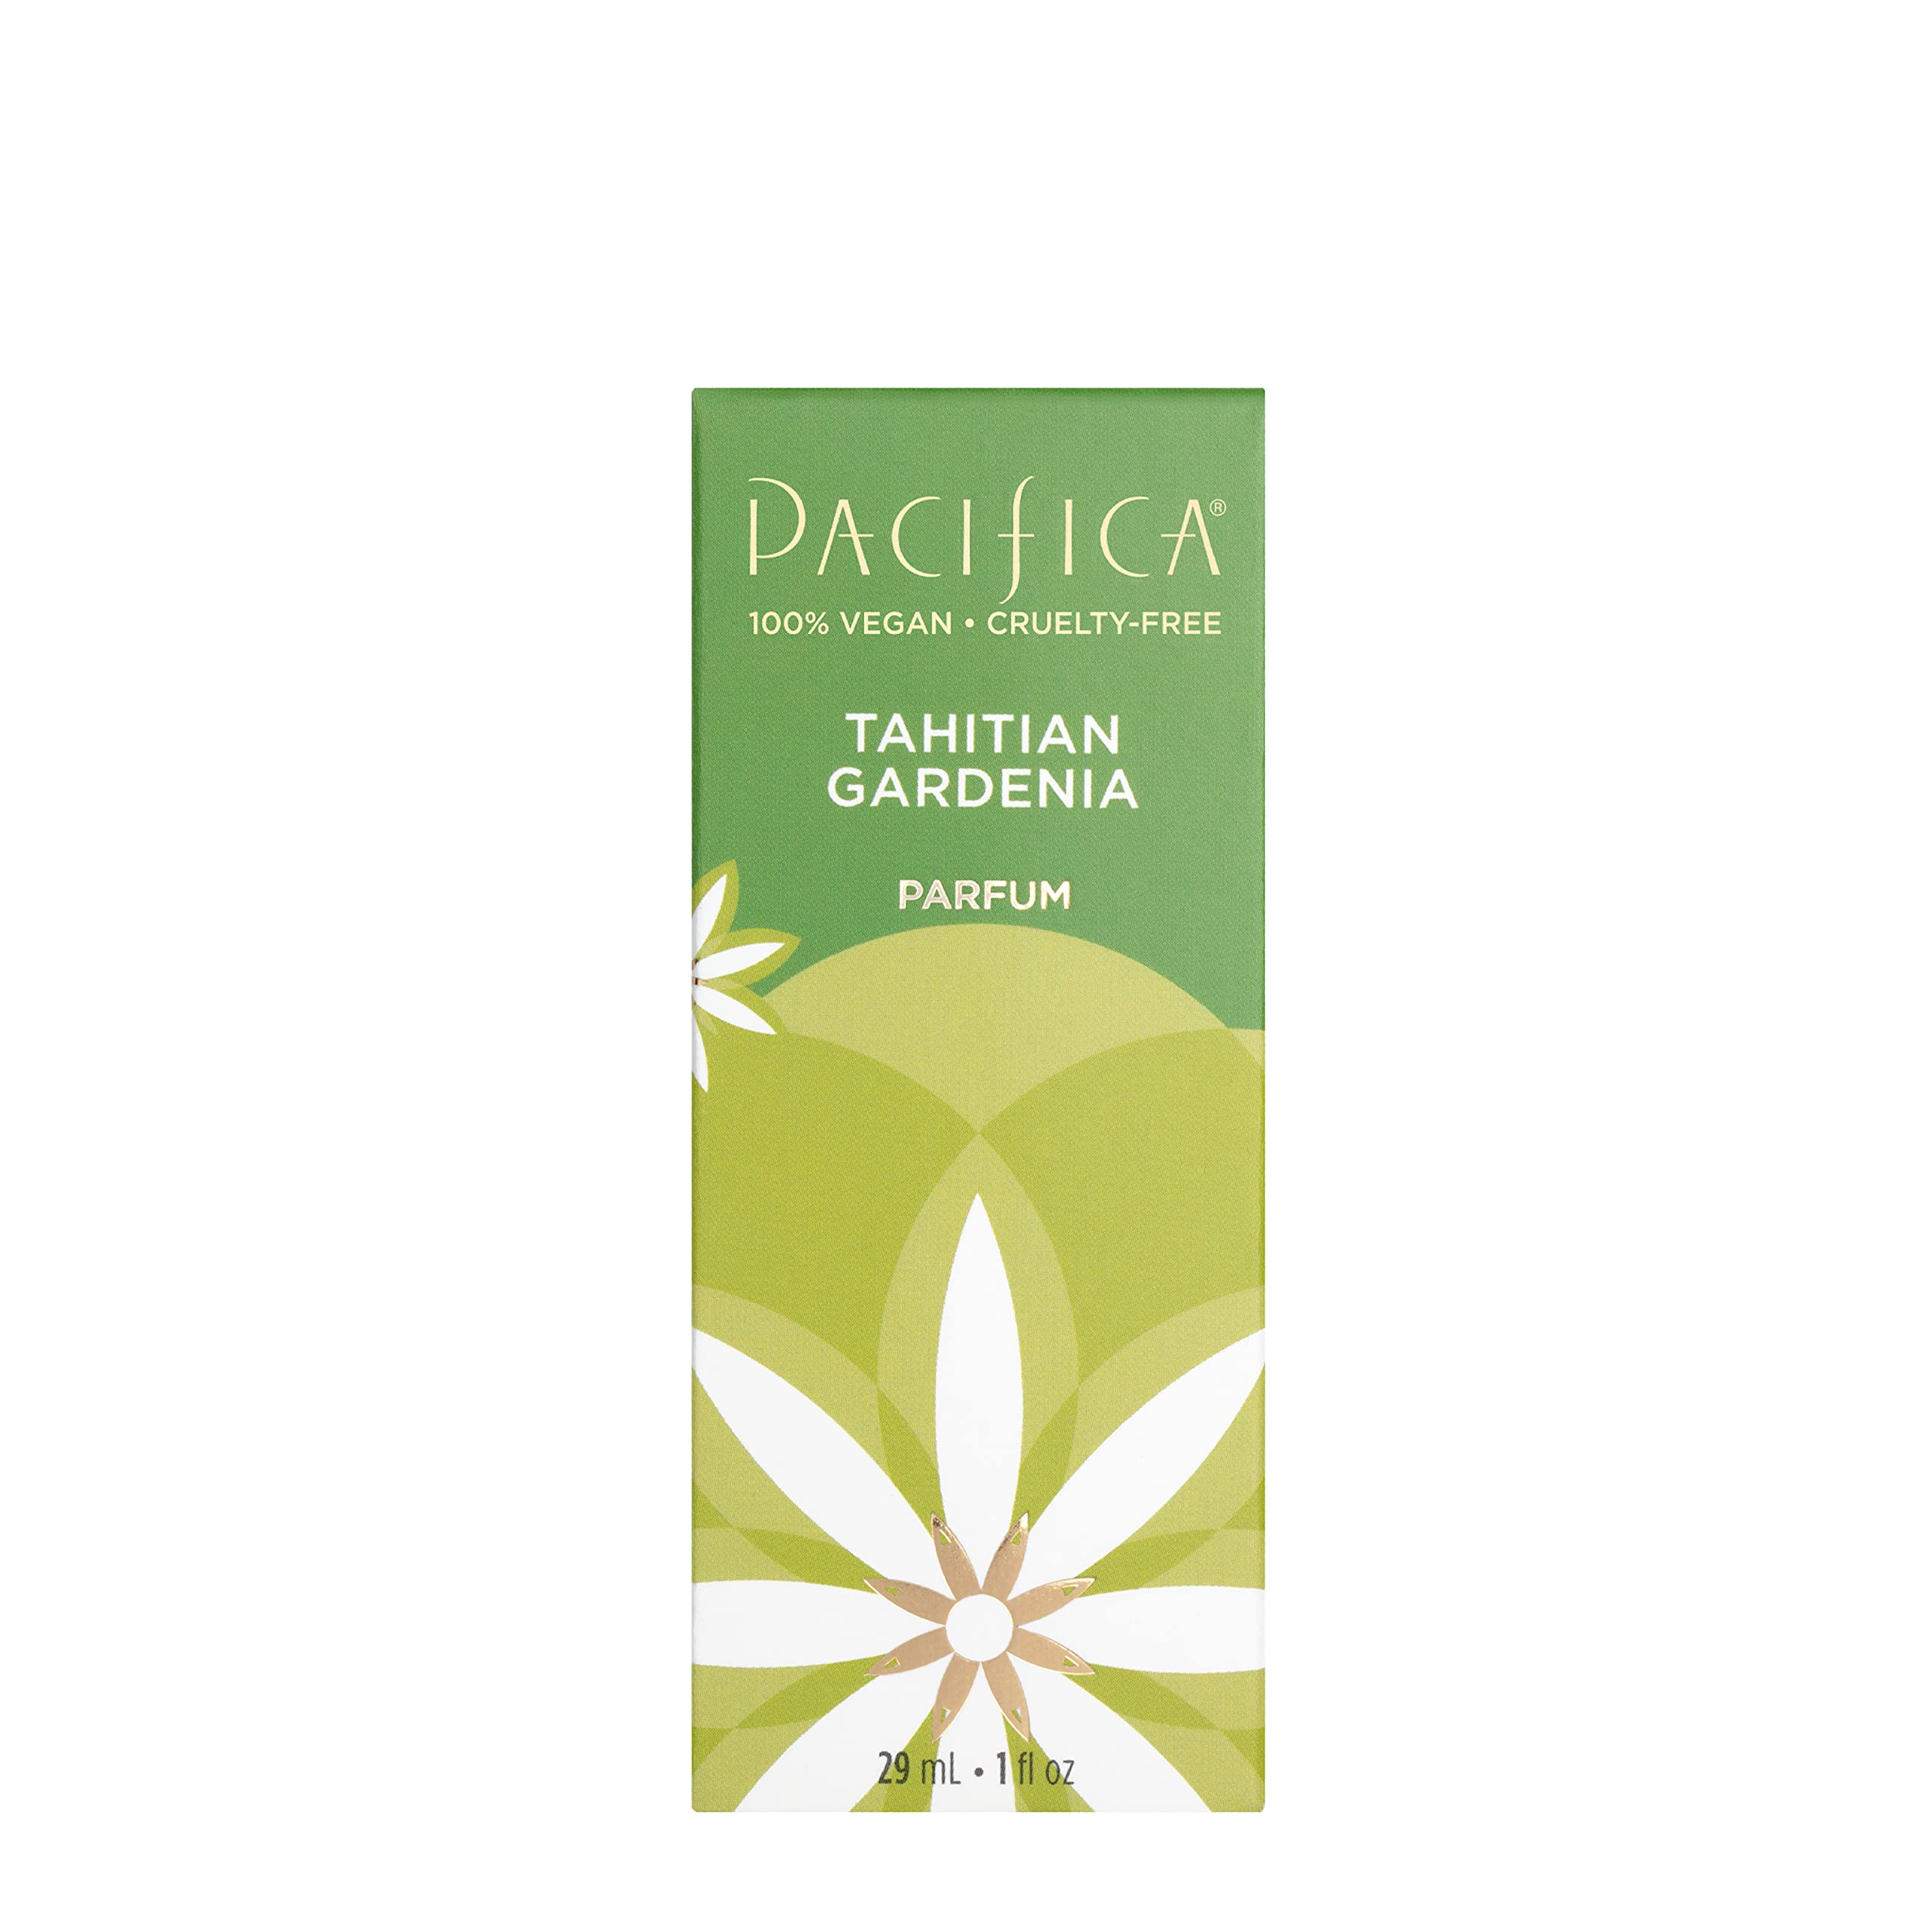 Pacifica Beauty, Tahitian Gardenia Clean Fragrance Spray Perfume, Made with Natural & Essential Oils, Citrus Gardenia & Jasmine Scent, Vegan + Cruelty Free, Phthalate-Free, Paraben-Free Gifts for Her